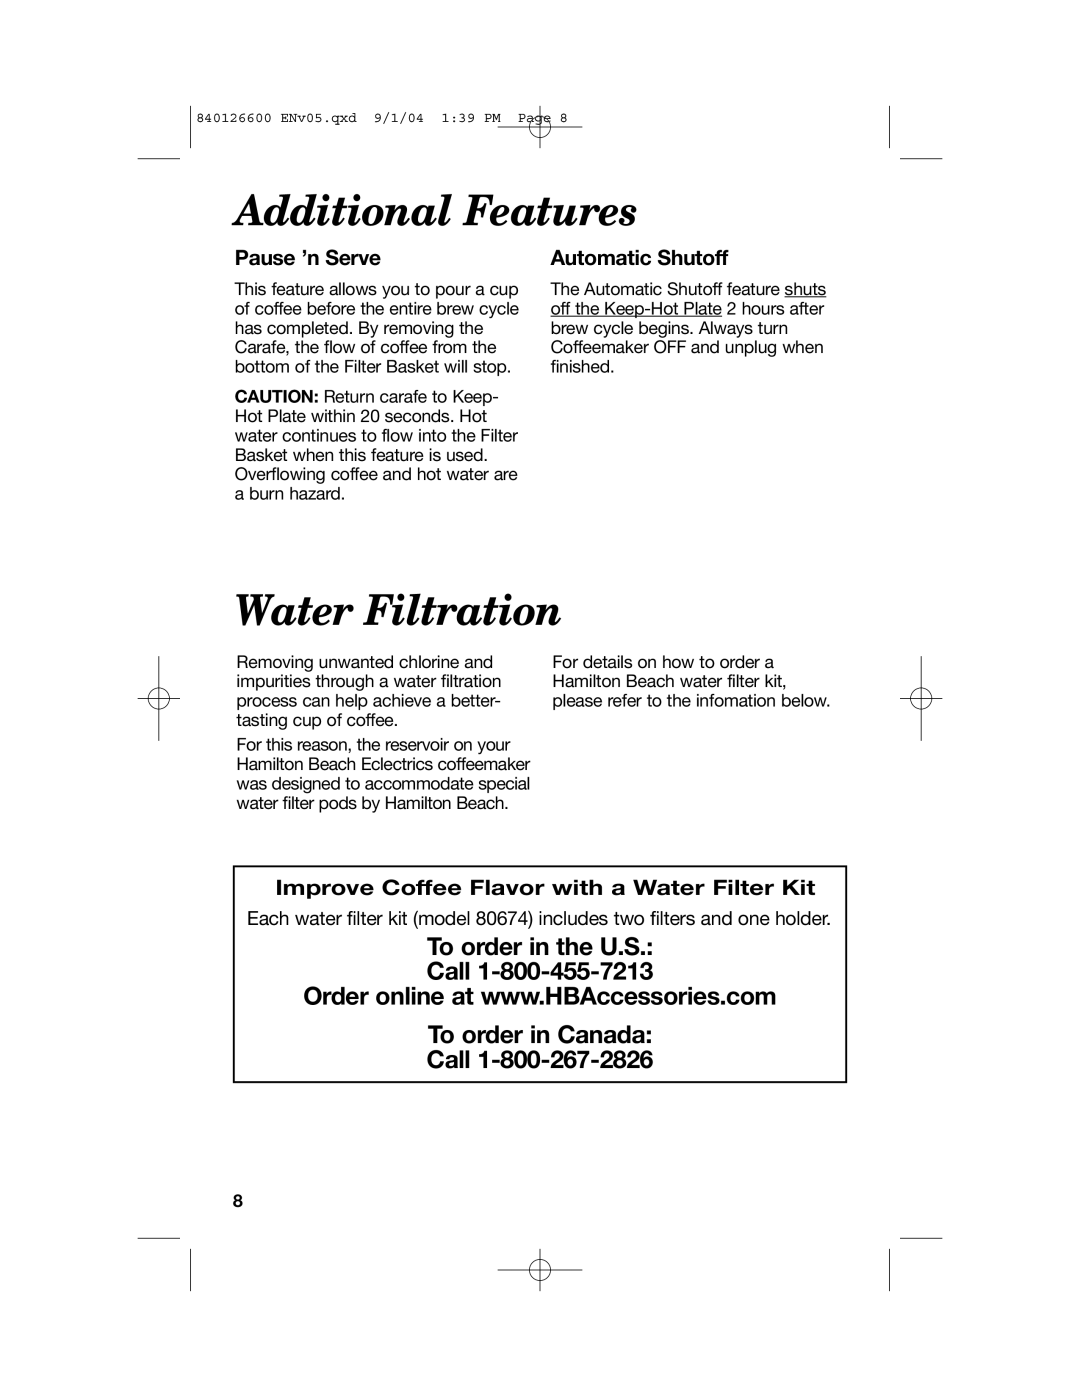 Hamilton Beach 80674 Additional Features, Water Filtration, To order in Canada Call, Pause ’n Serve, Automatic Shutoff 